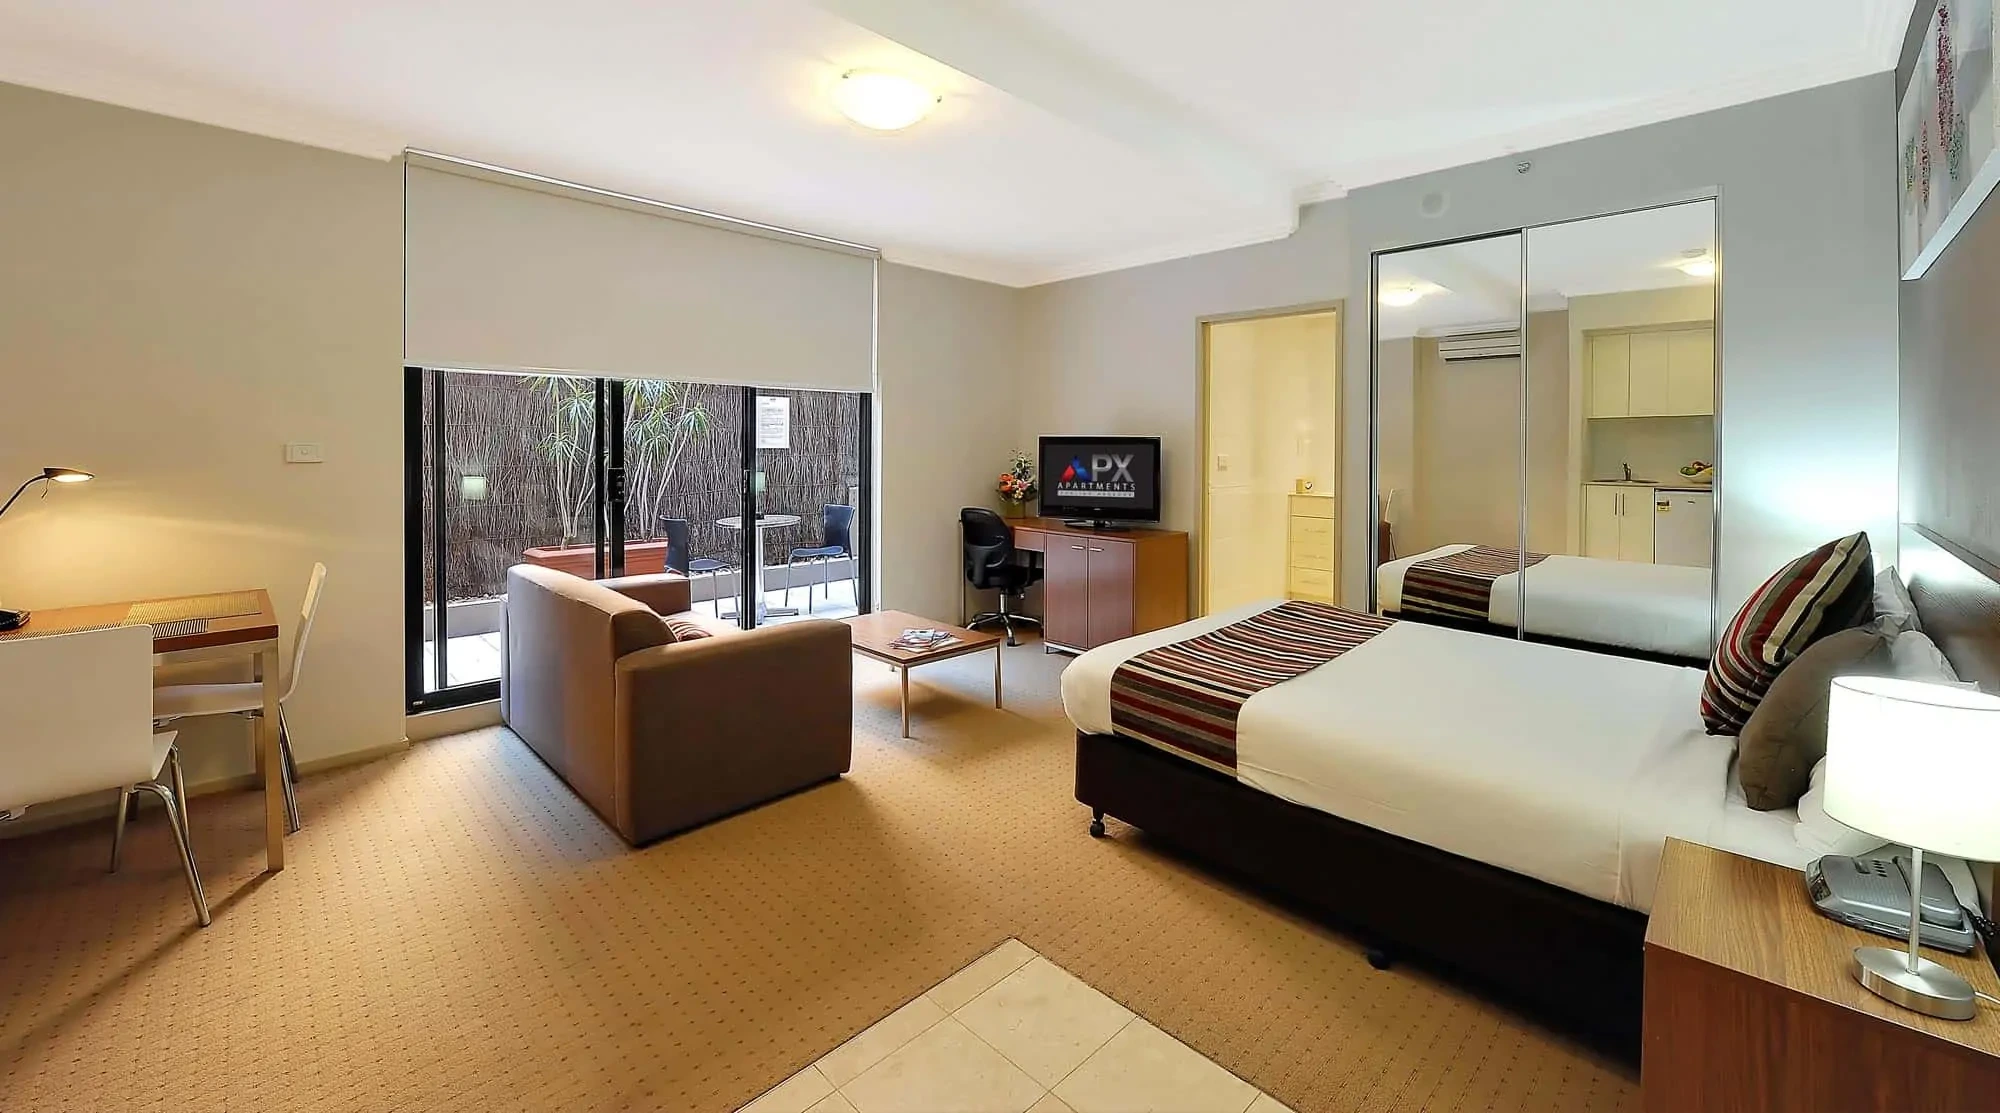 APX Darling Harbour studio apartment 1 bedroom accommodation in Darling Harbour Sydney Australia